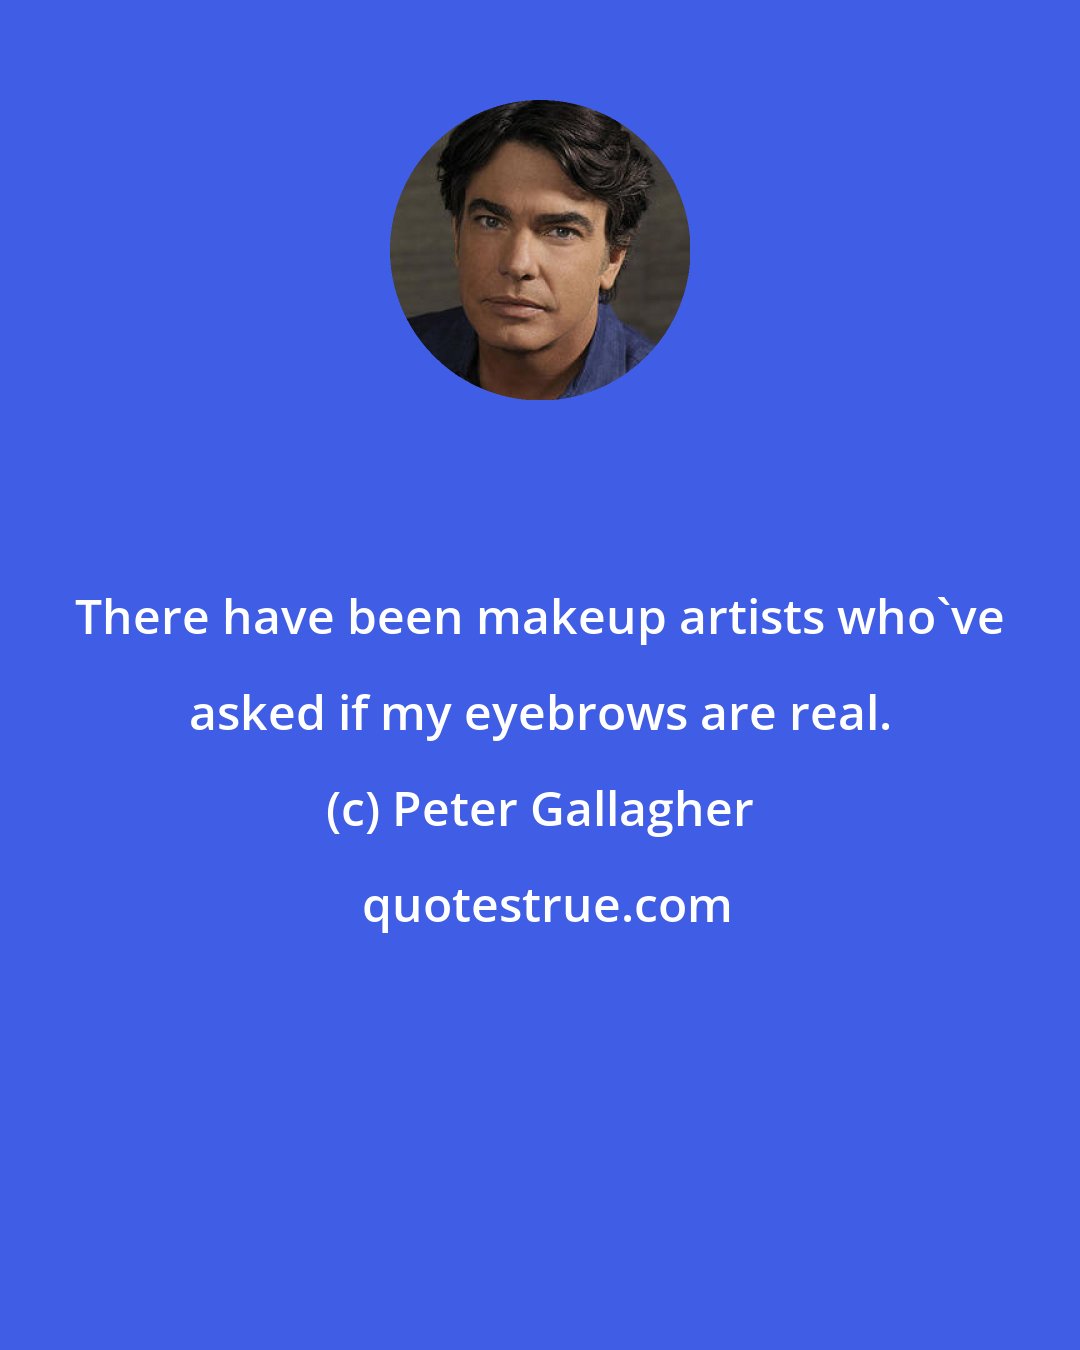 Peter Gallagher: There have been makeup artists who've asked if my eyebrows are real.